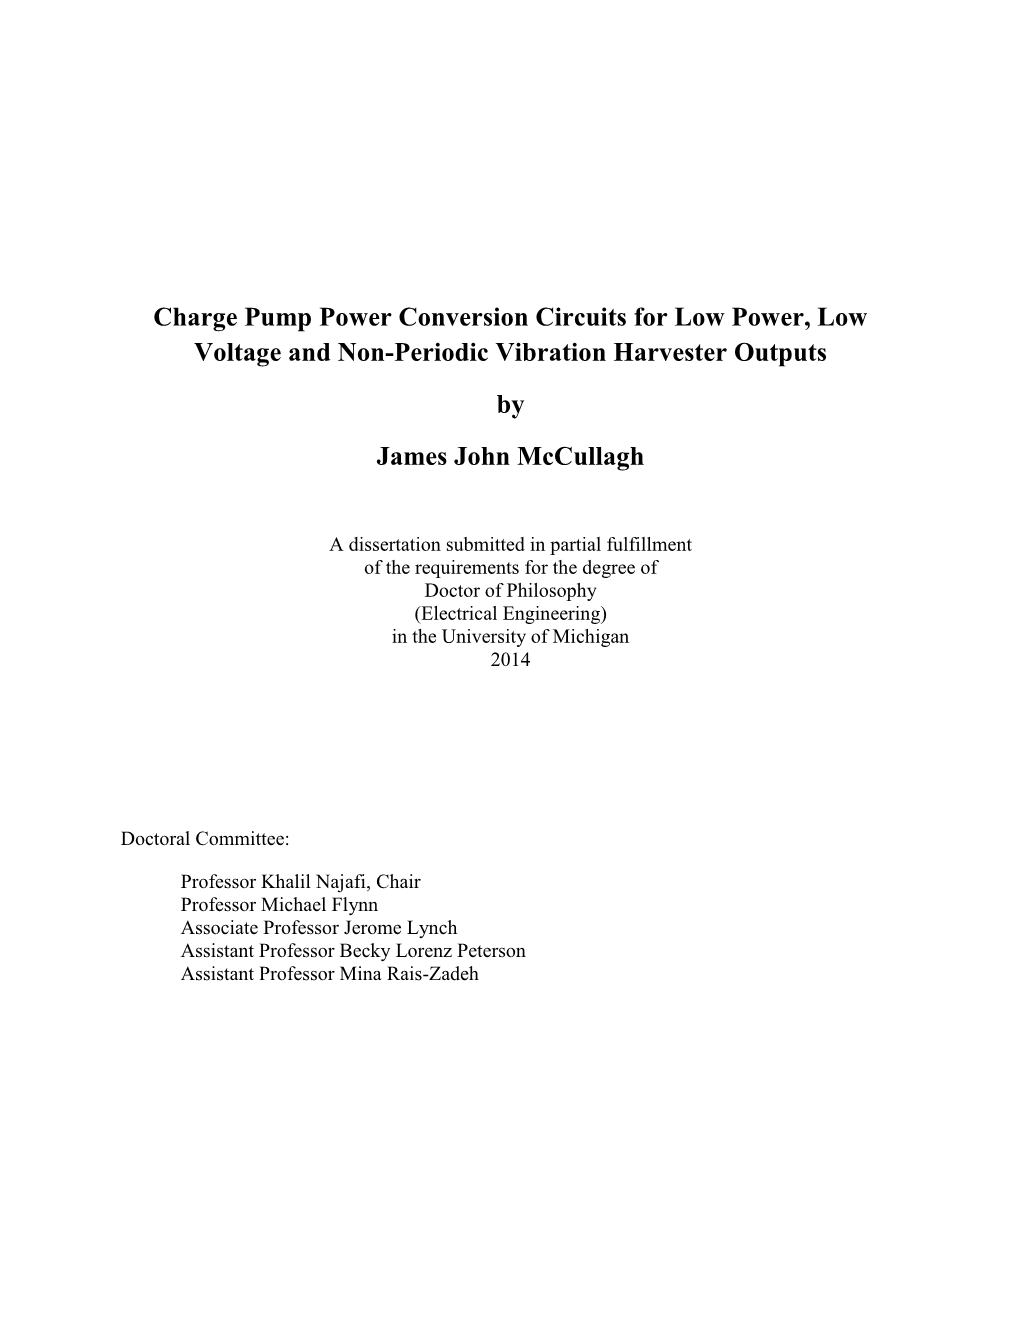 Charge Pump Power Conversion Circuits for Low Power, Low Voltage and Non-Periodic Vibration Harvester Outputs by James John Mccullagh